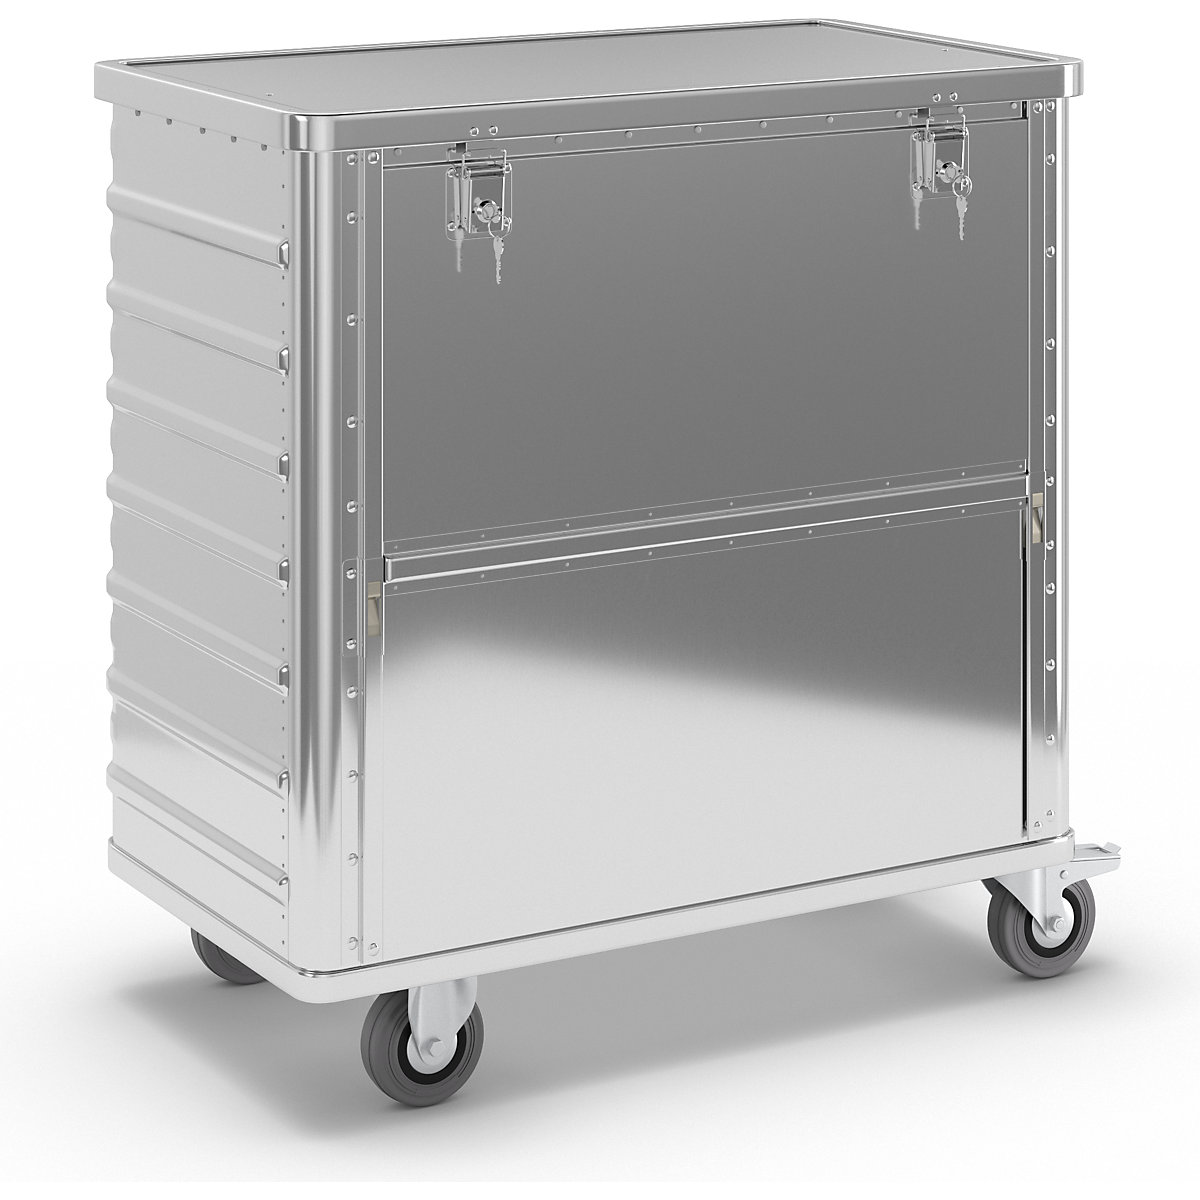 Aluminium container truck, fold down side panel - Gmöhling